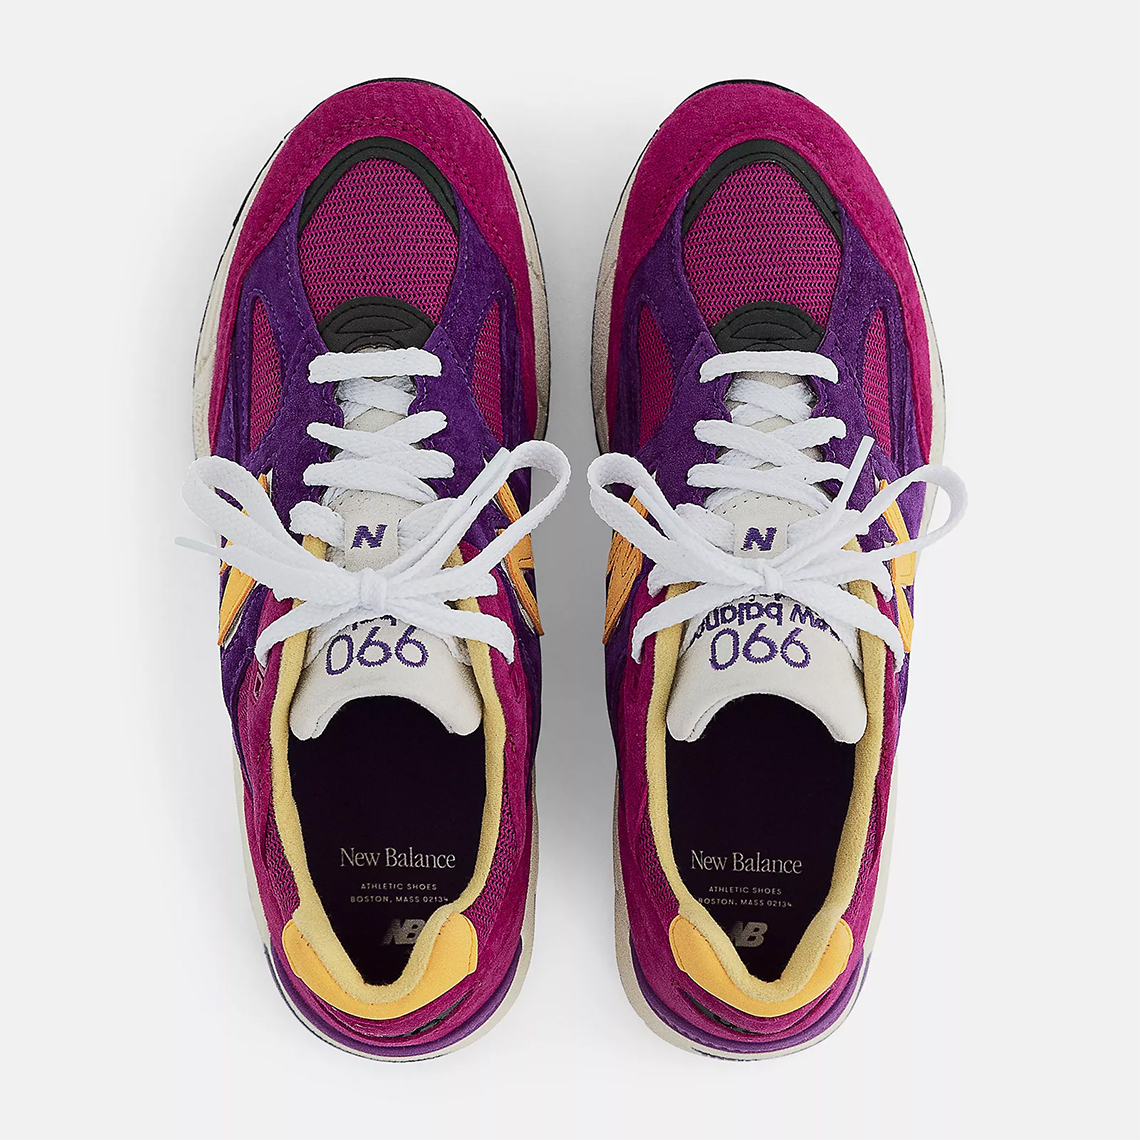 Everything You Need To Know About The J Balvin x Air Jordan 3 Rio M990py2 Purple Yellow 2